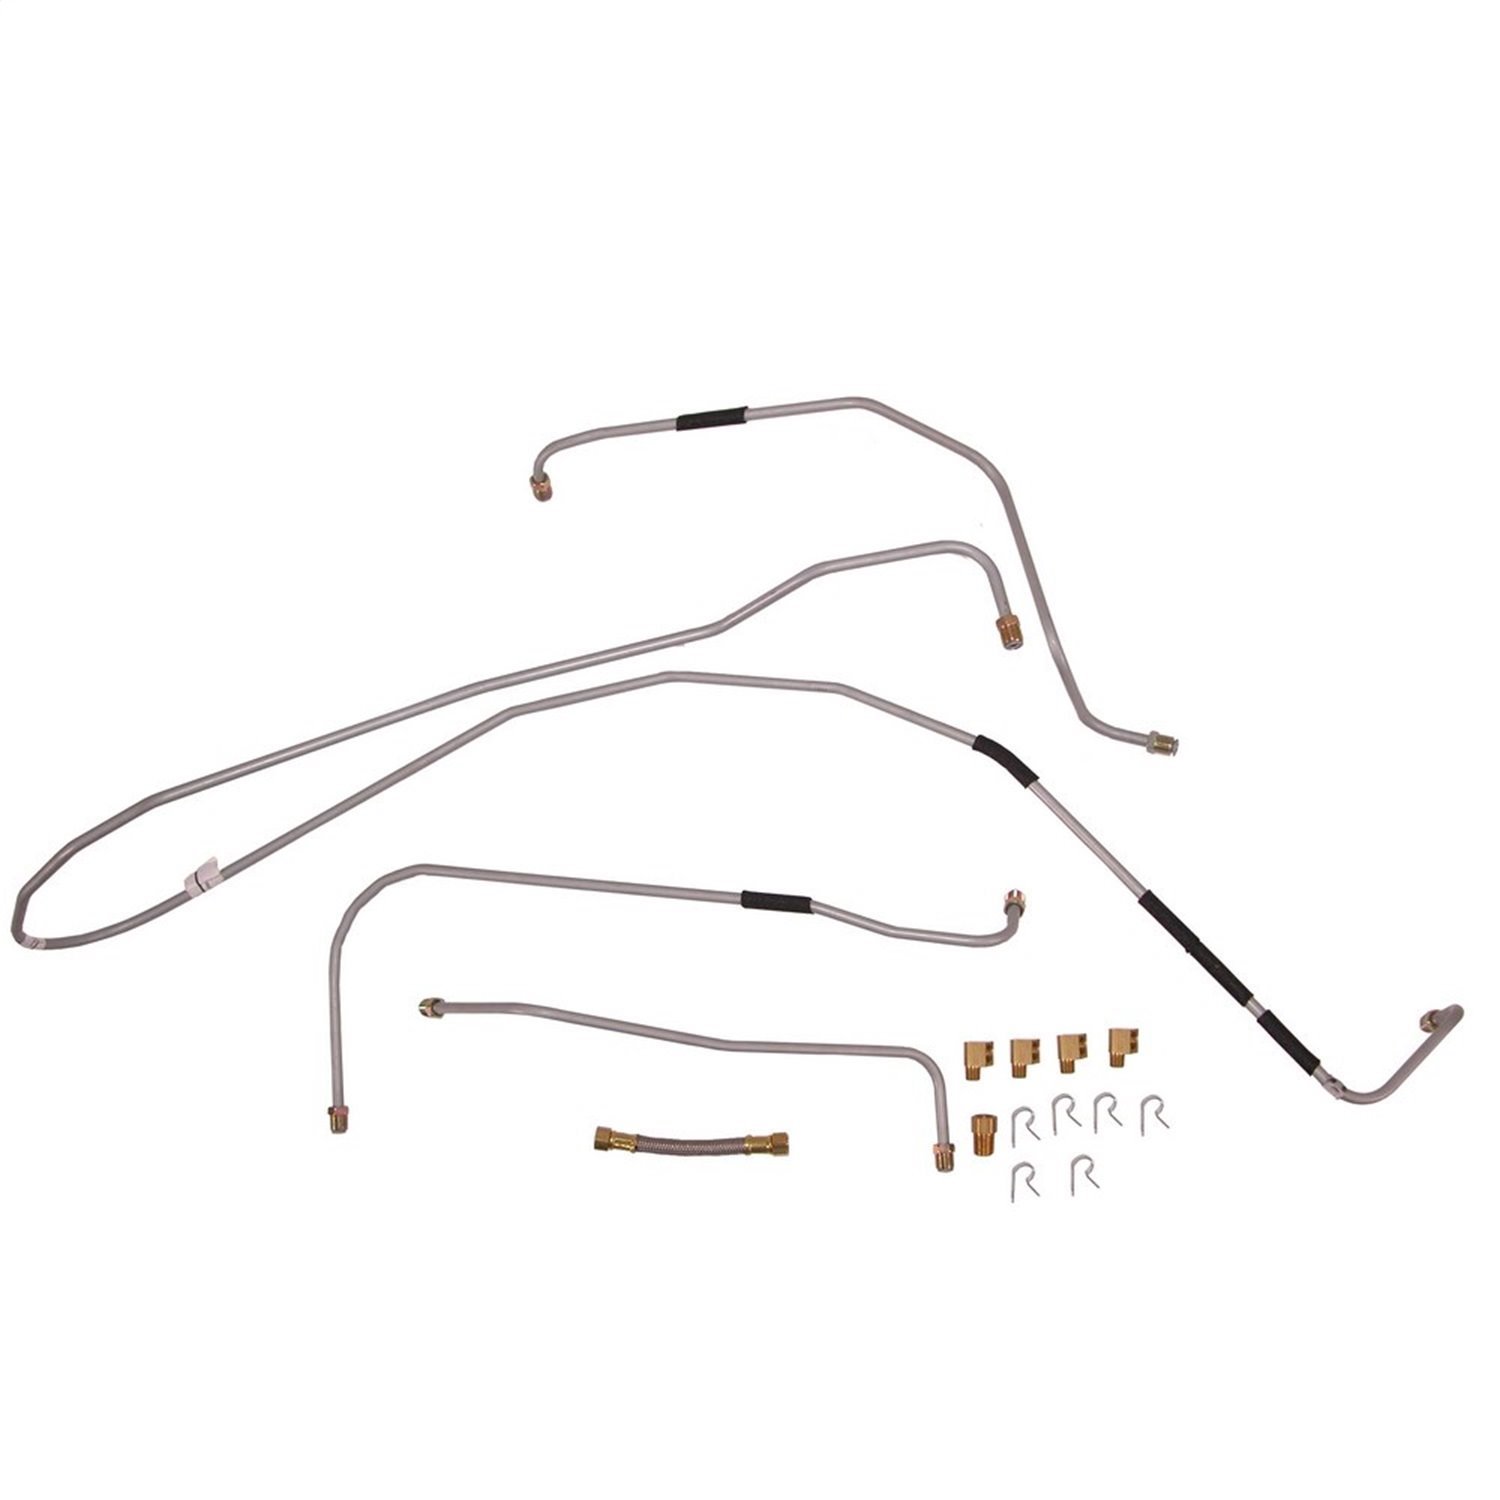 Replacement fuel line set from Omix-ADA, Fits 41-44 Willys MBs and 41-44 Ford GPWs.